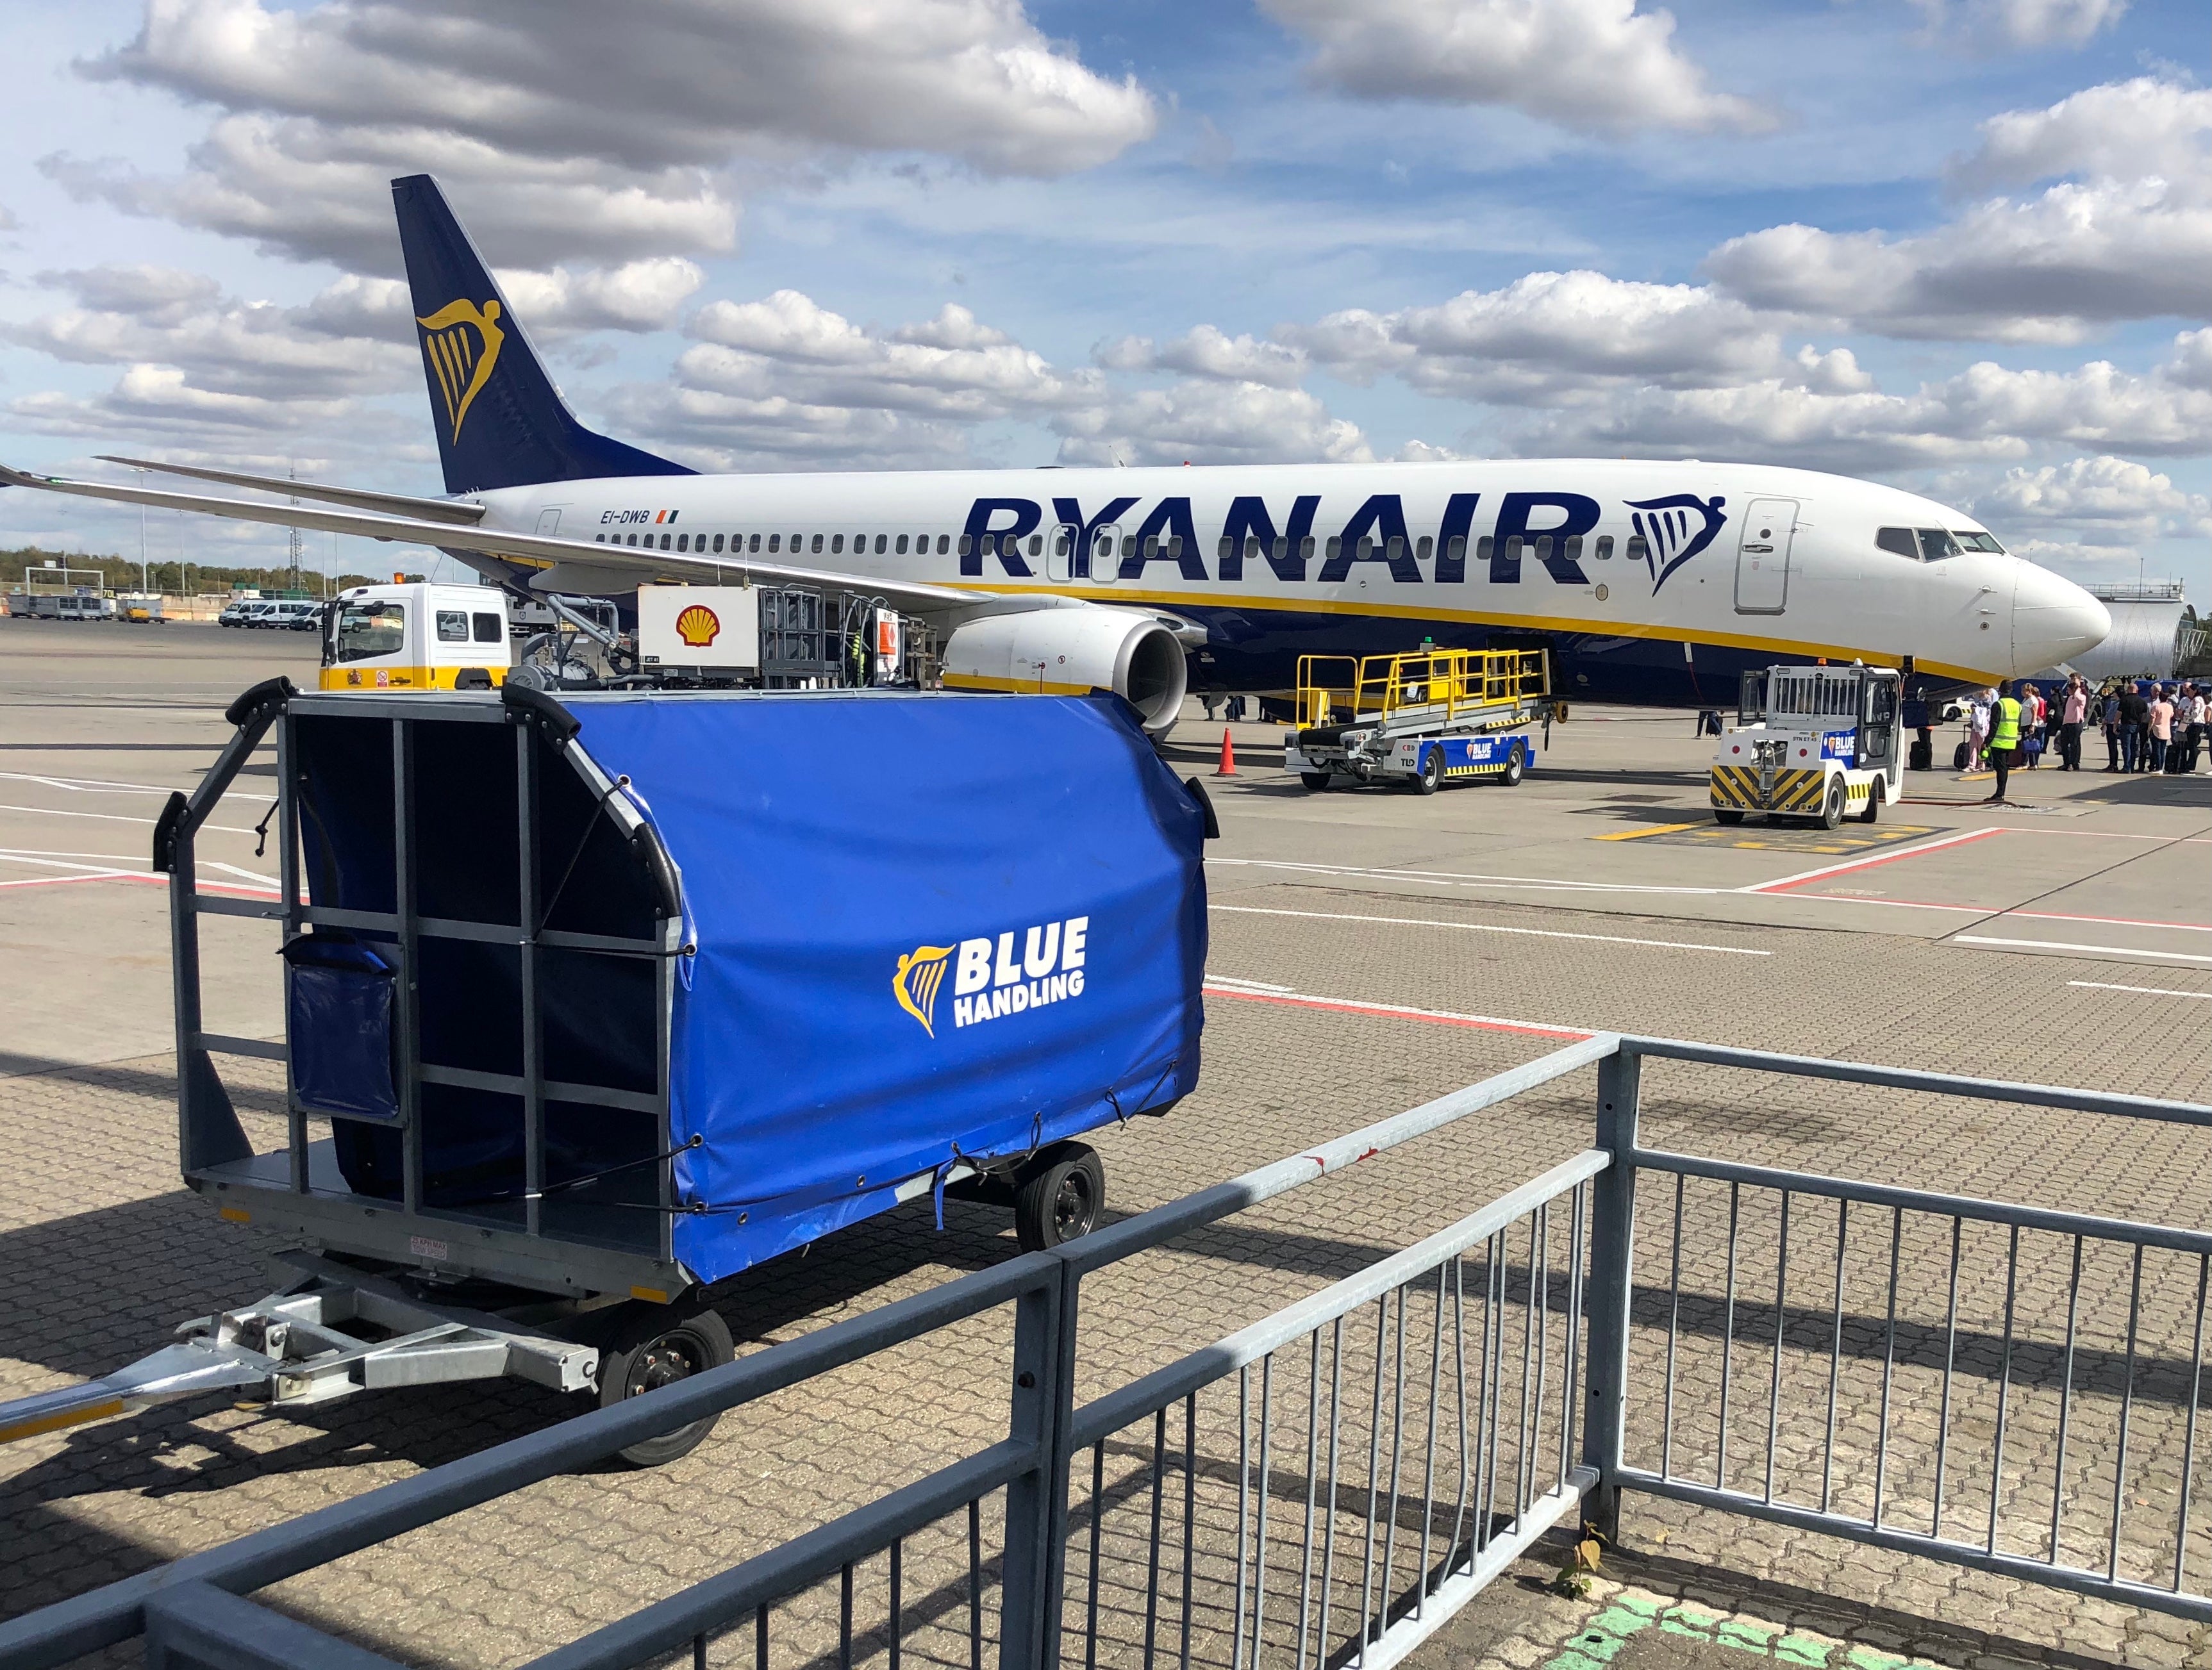 €10 or less from Rome: a Ryanair plane at London Stansted airport